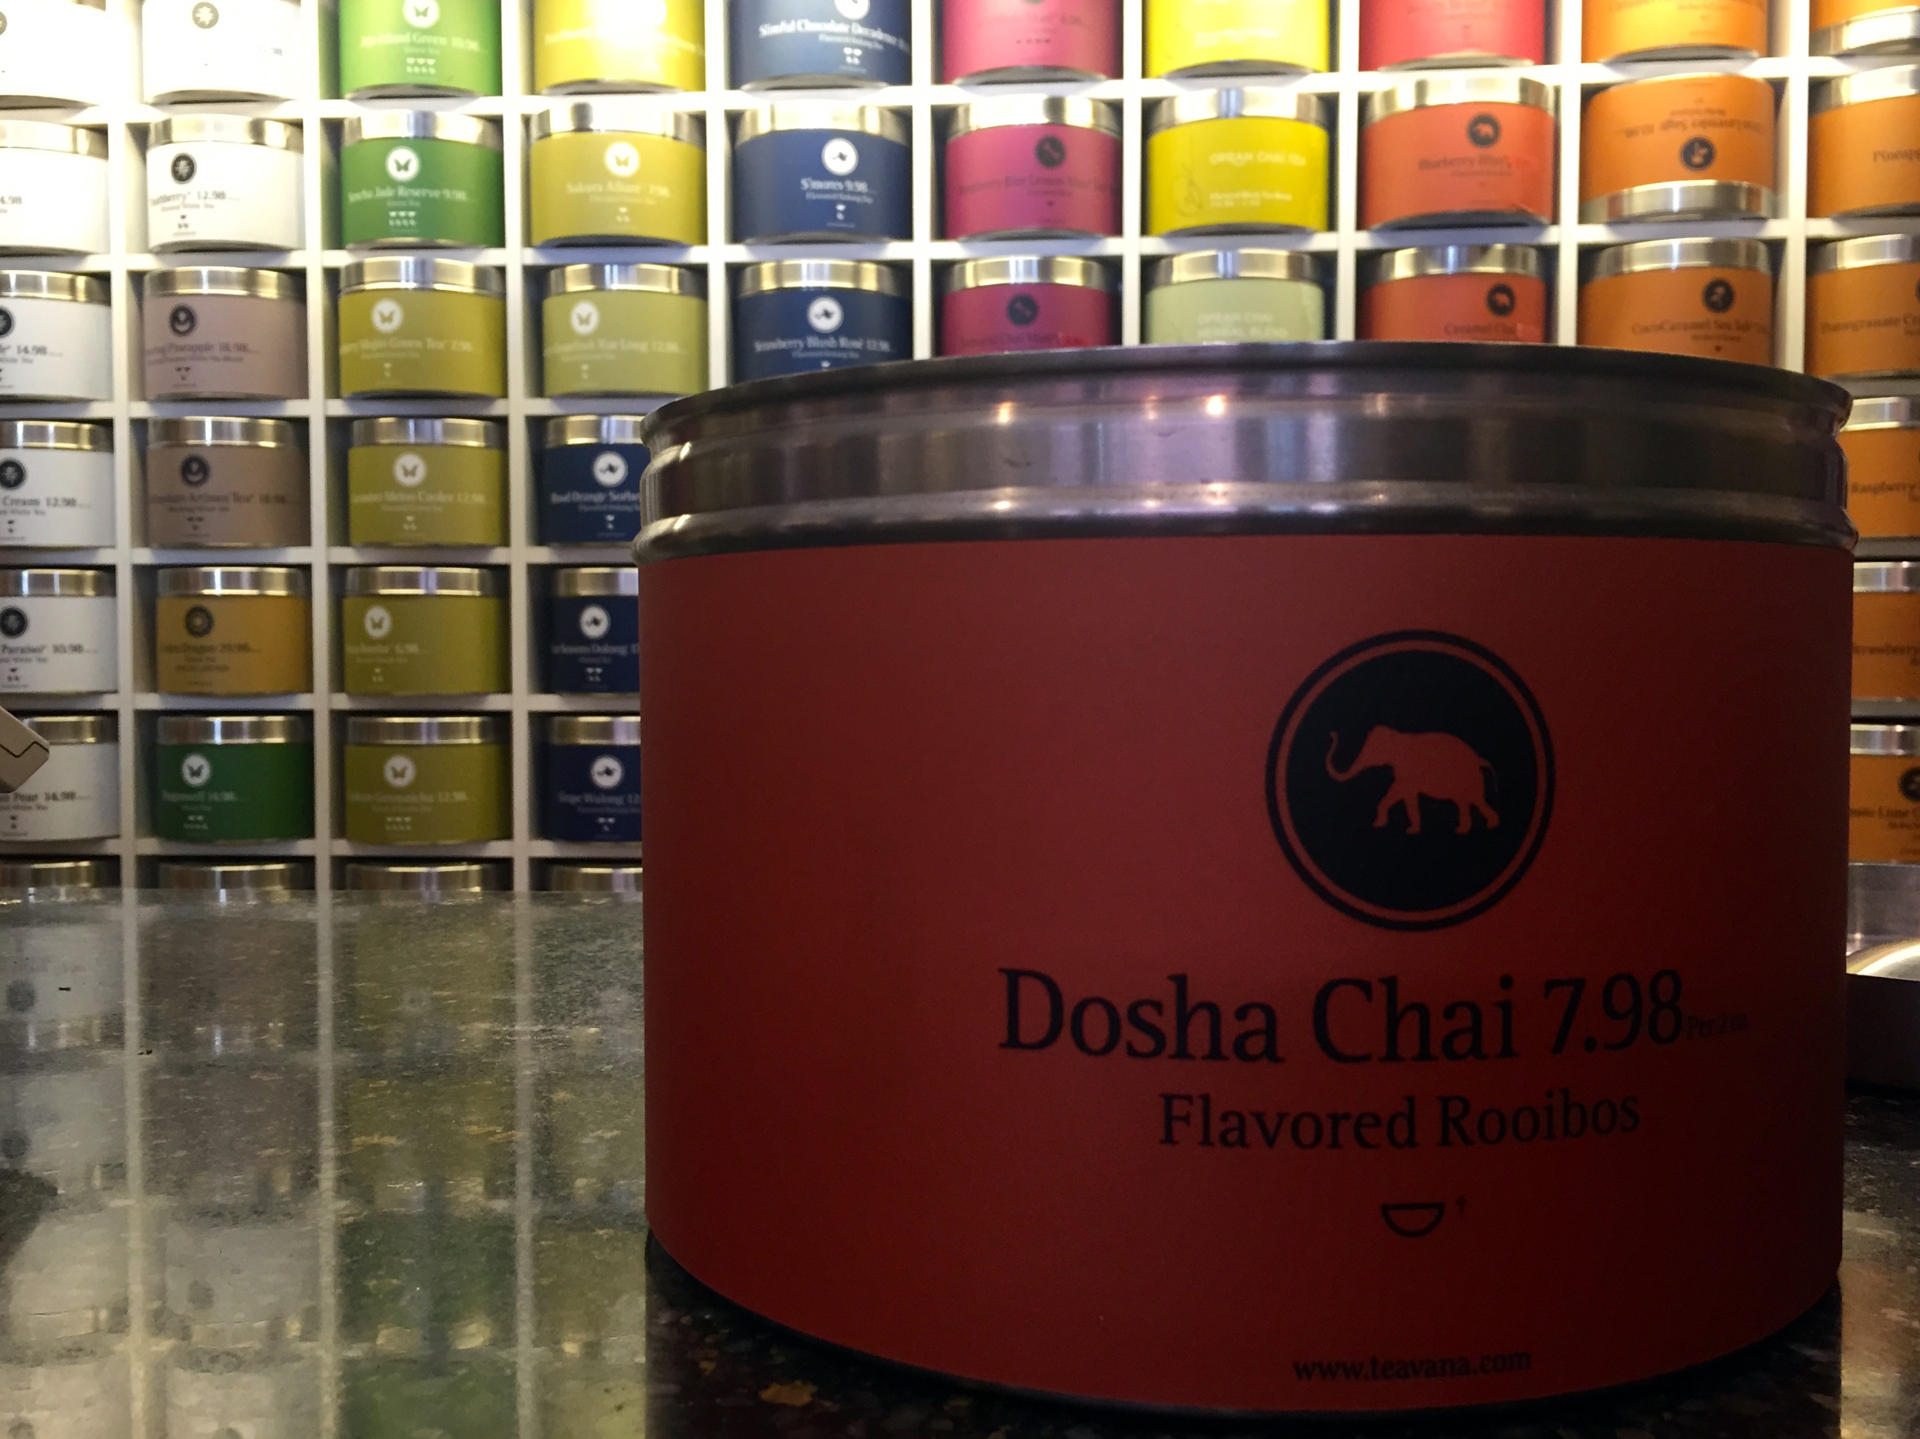 Teavana offers multiple rooibos blends in their Corte Madera store.